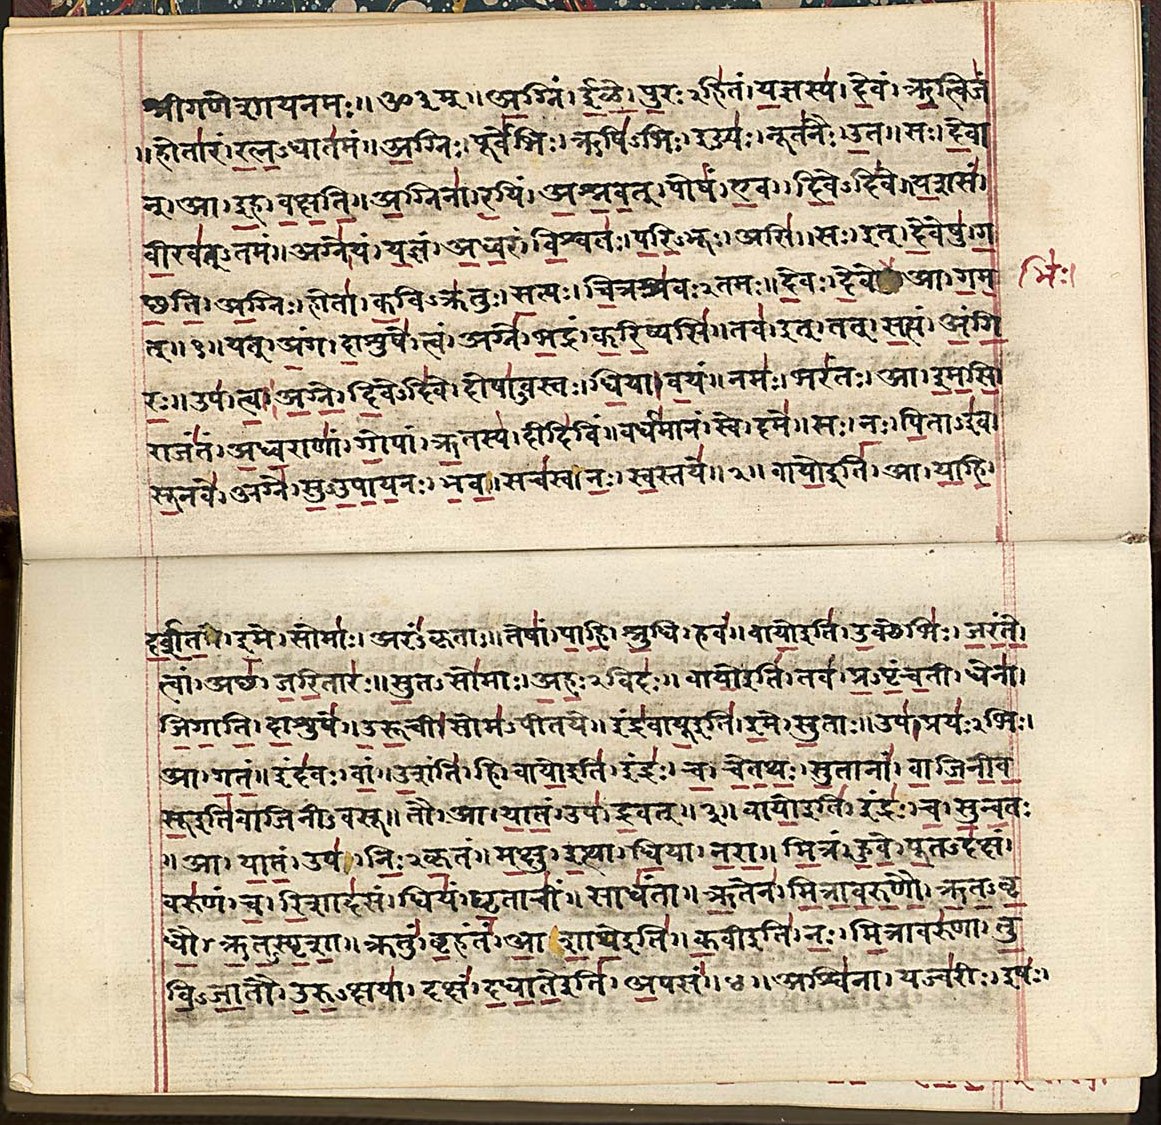 Image of Rigveda, showing lines of text